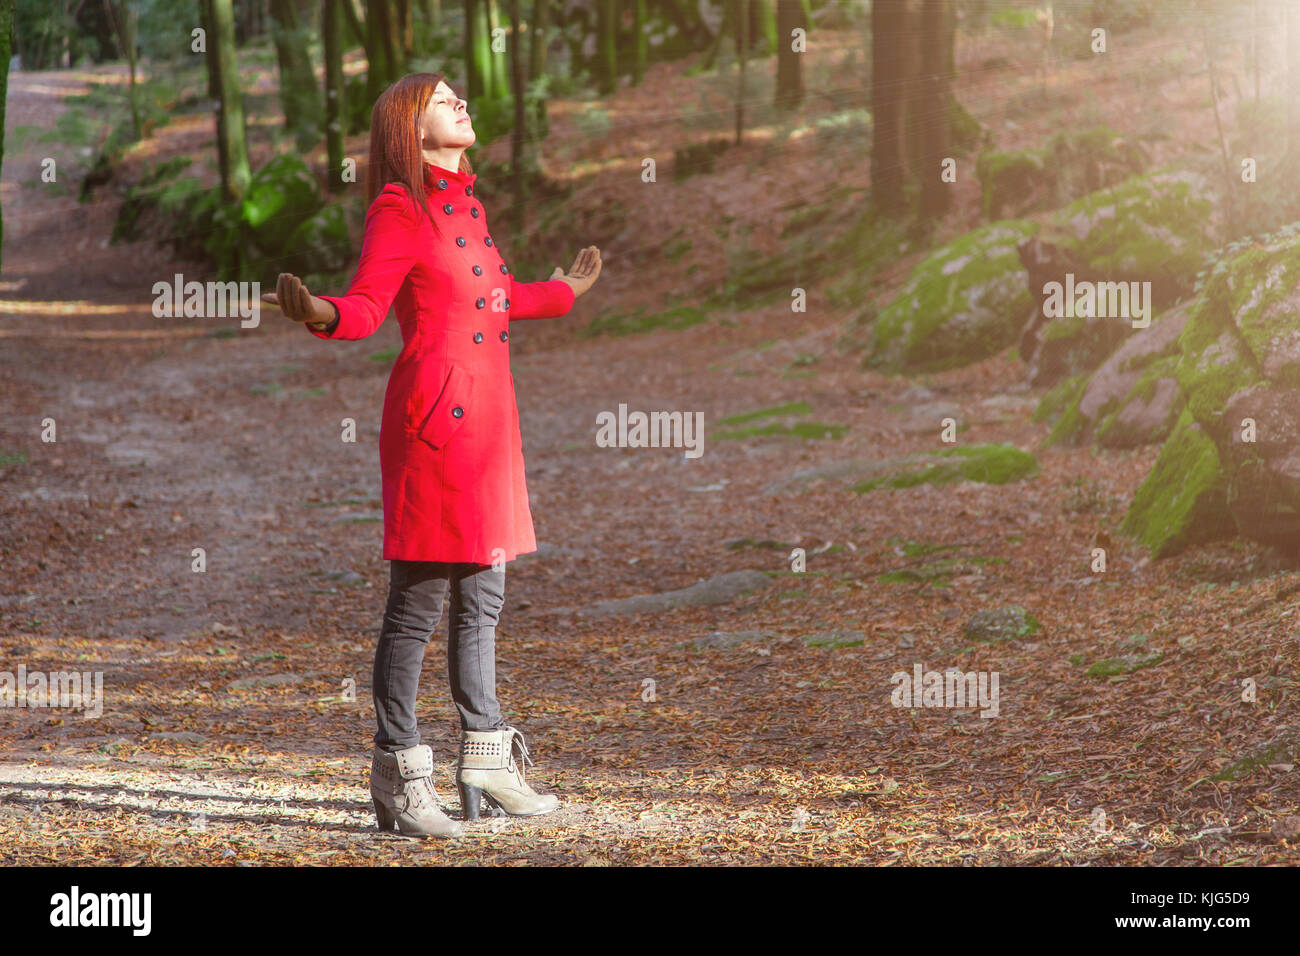 Woman enjoying the warmth of winter sunlight alone on forest park path with arms open receiving rays of light, wearing a red long coat or overcoat Stock Photo